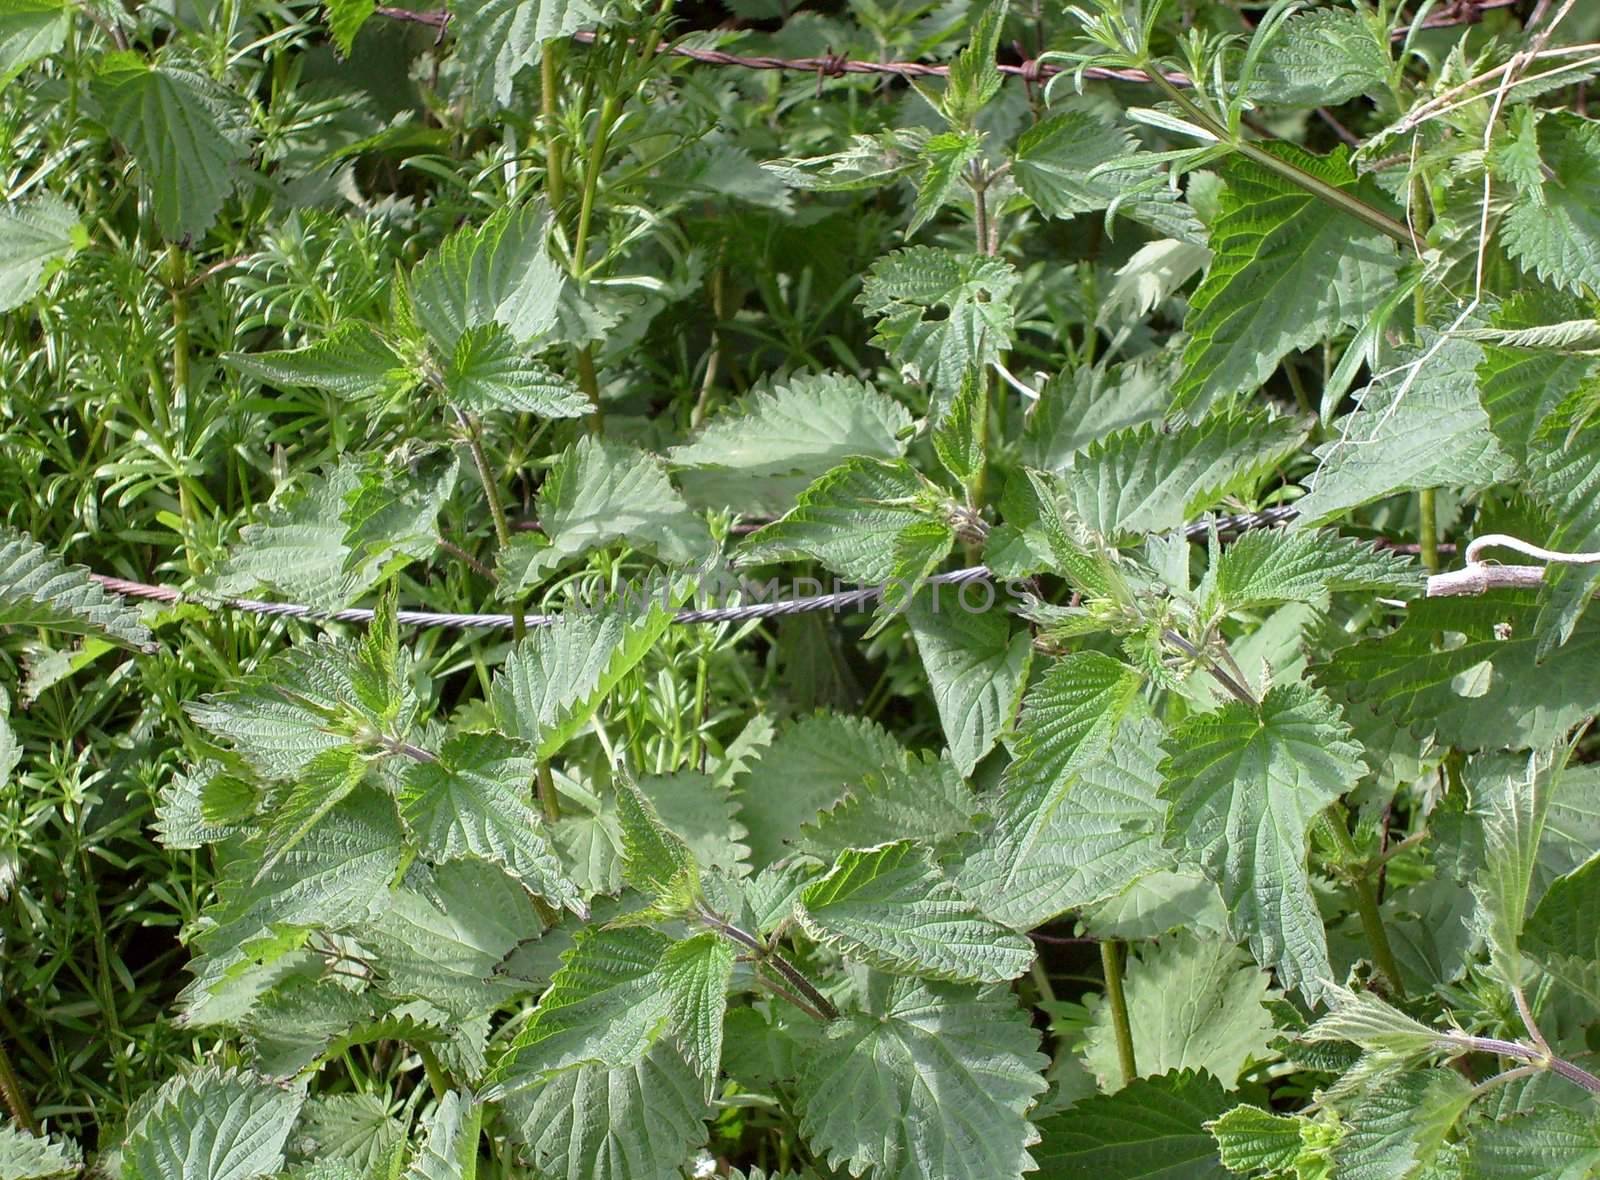 Patch of stinging nettles in rural countryside scene.